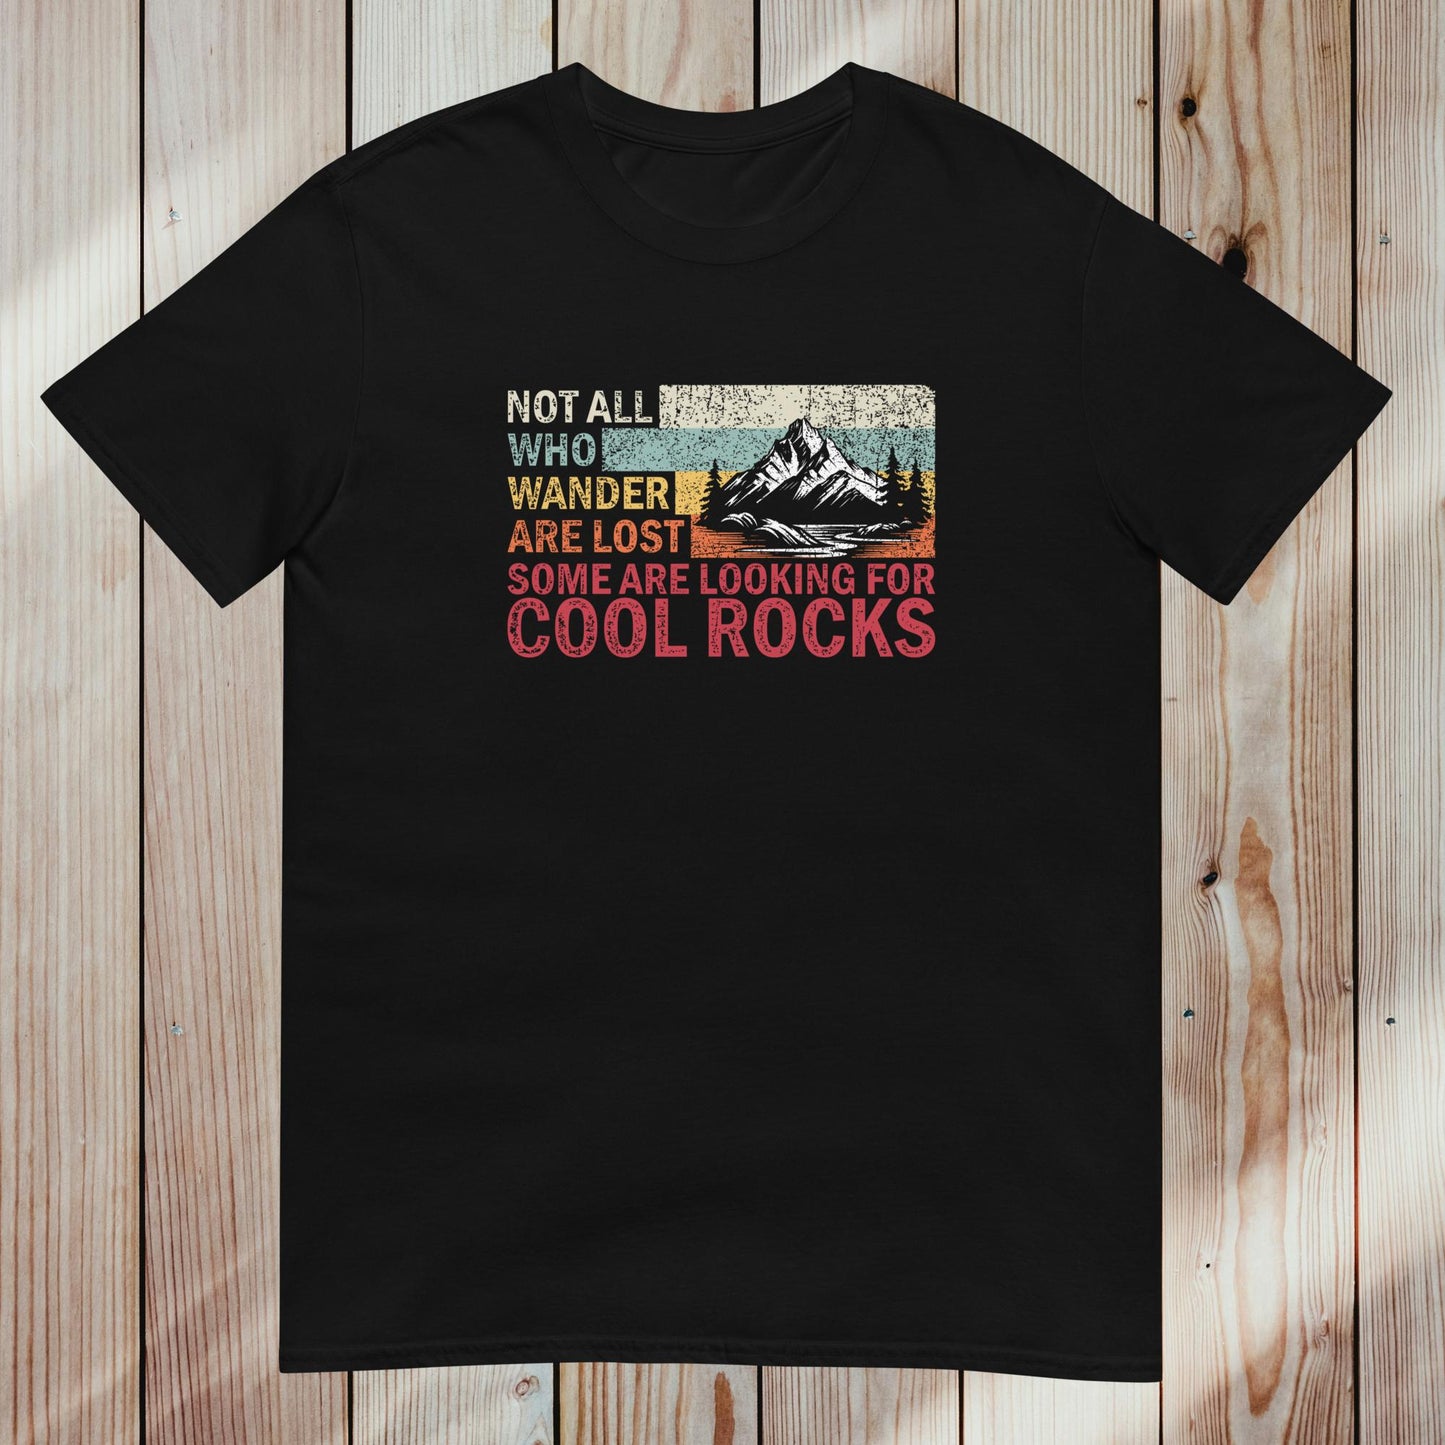 Unisex T-Shirt: "Not all who wander are lost, same are looking for cool rocks"